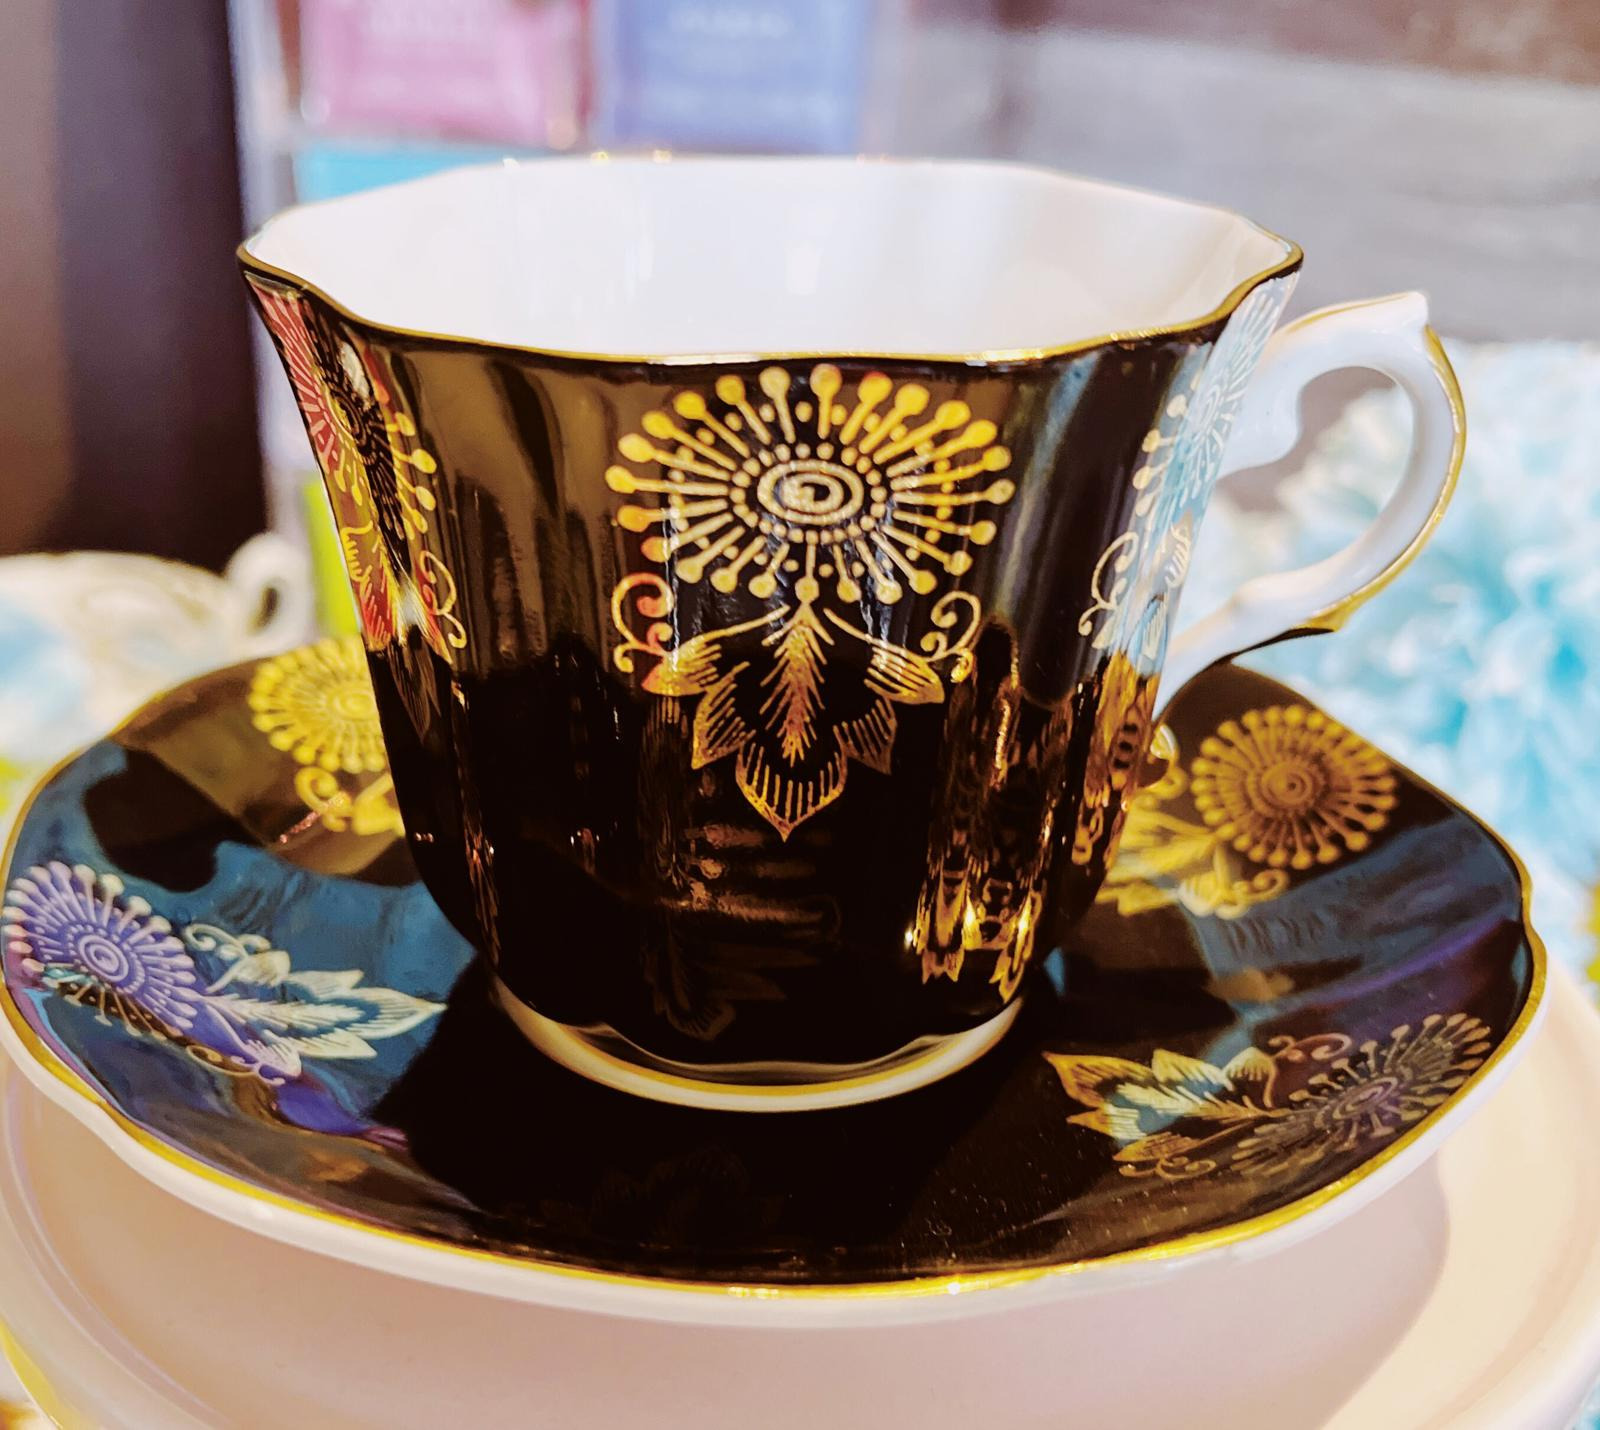 Gorgeous Black Royal Stafford and Gold VINTAGE Teacup w/ Extensive Gold Filigree